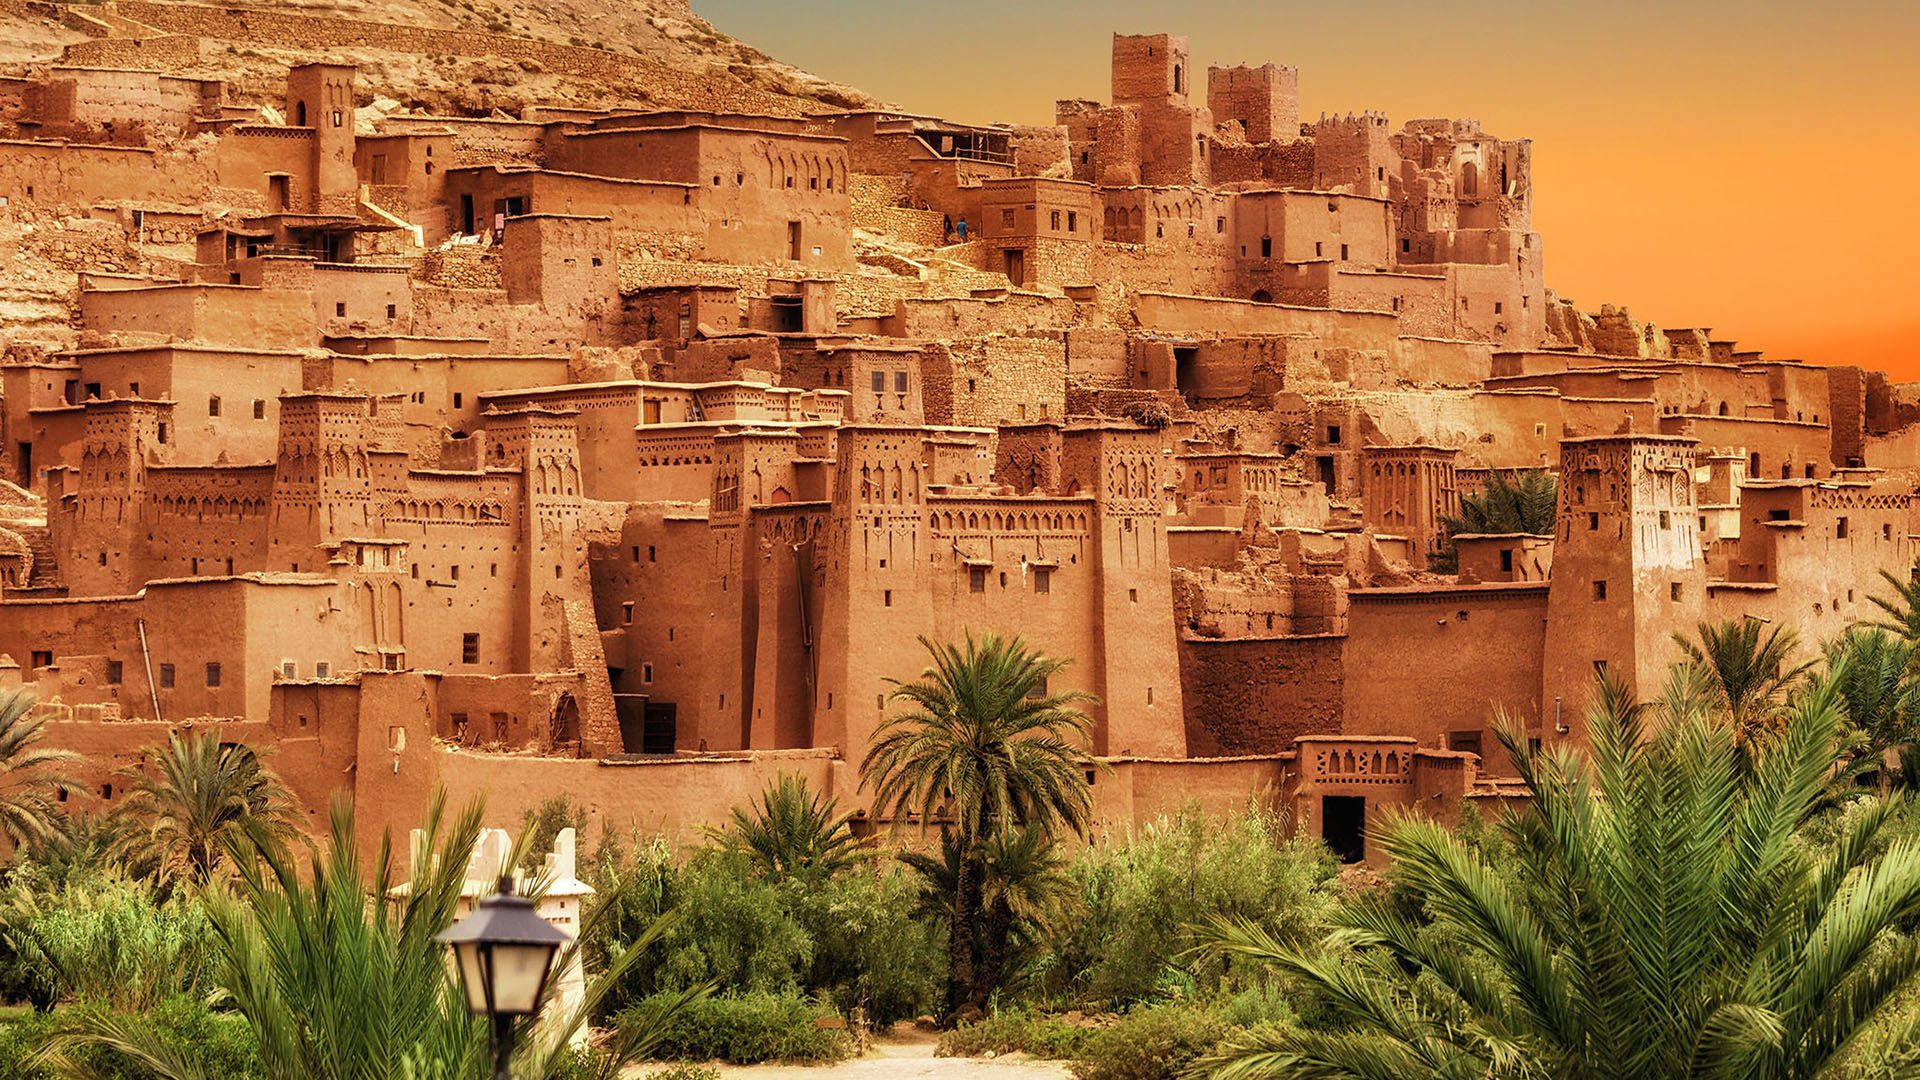 Ksar of Ait-Ben-Haddou is a historic fortified village, Photo By shutterstock, Ivan Soto Cobos